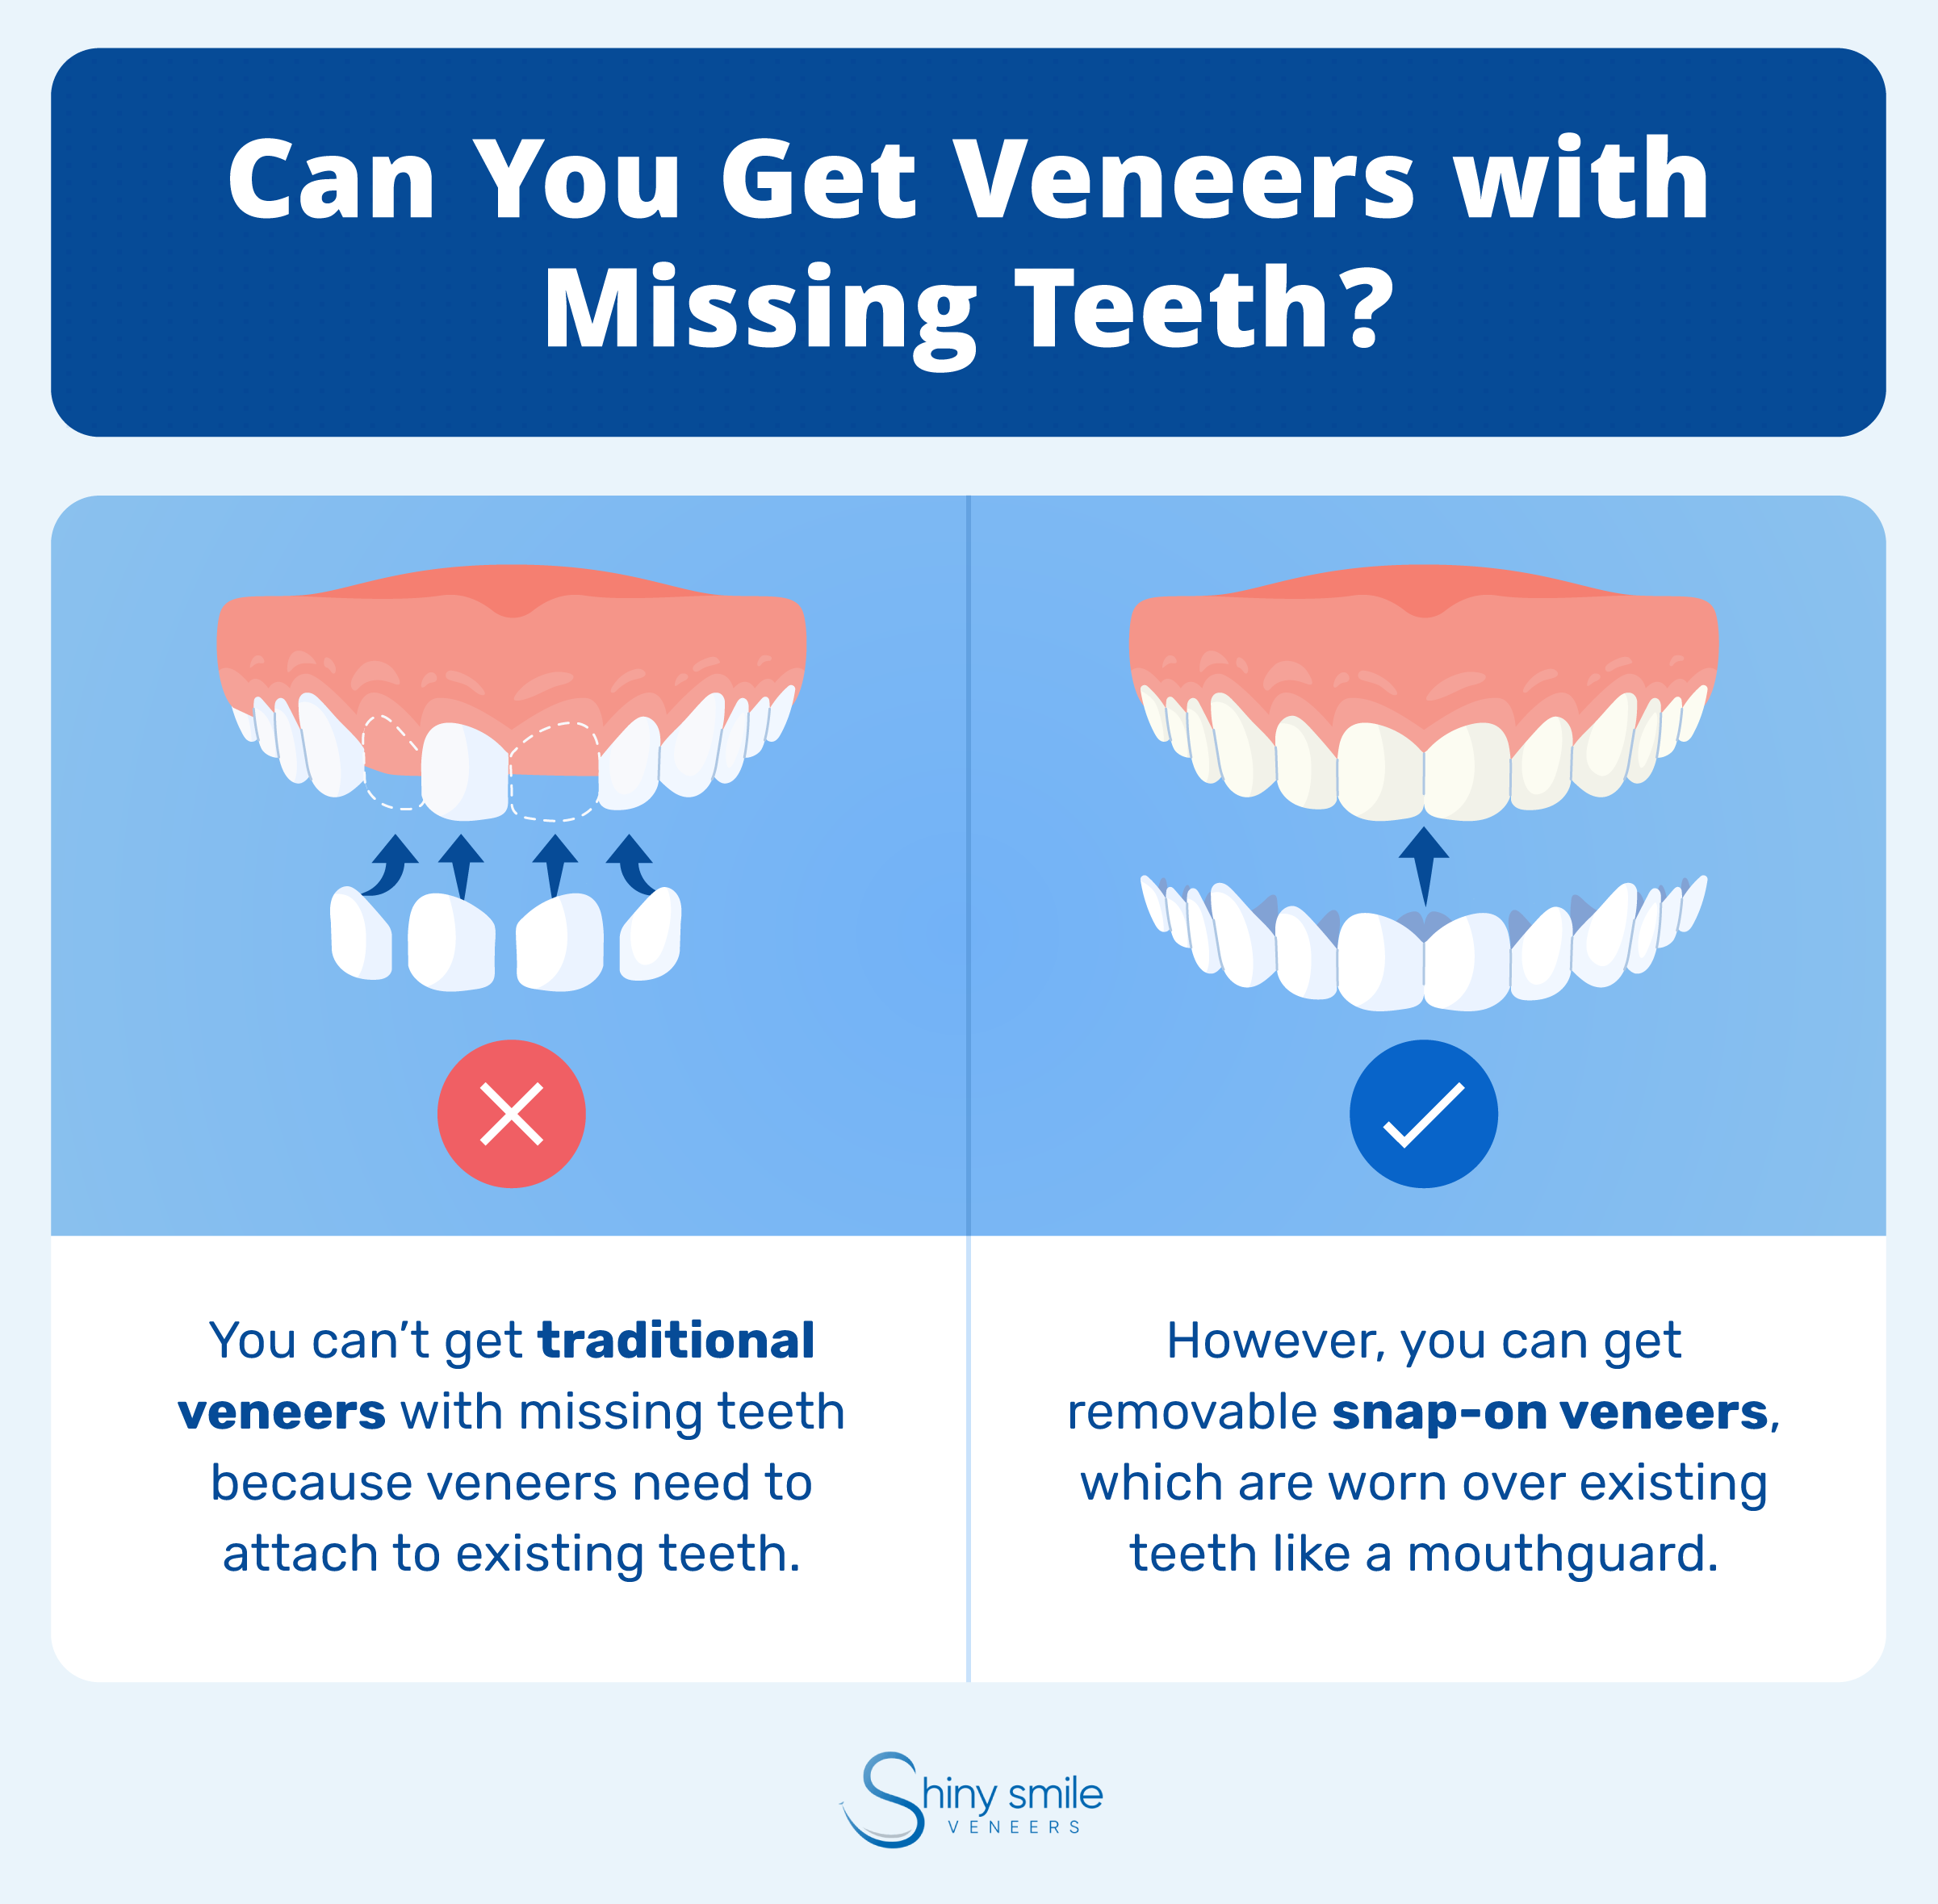 Why you can’t get traditional veneers with missing teeth